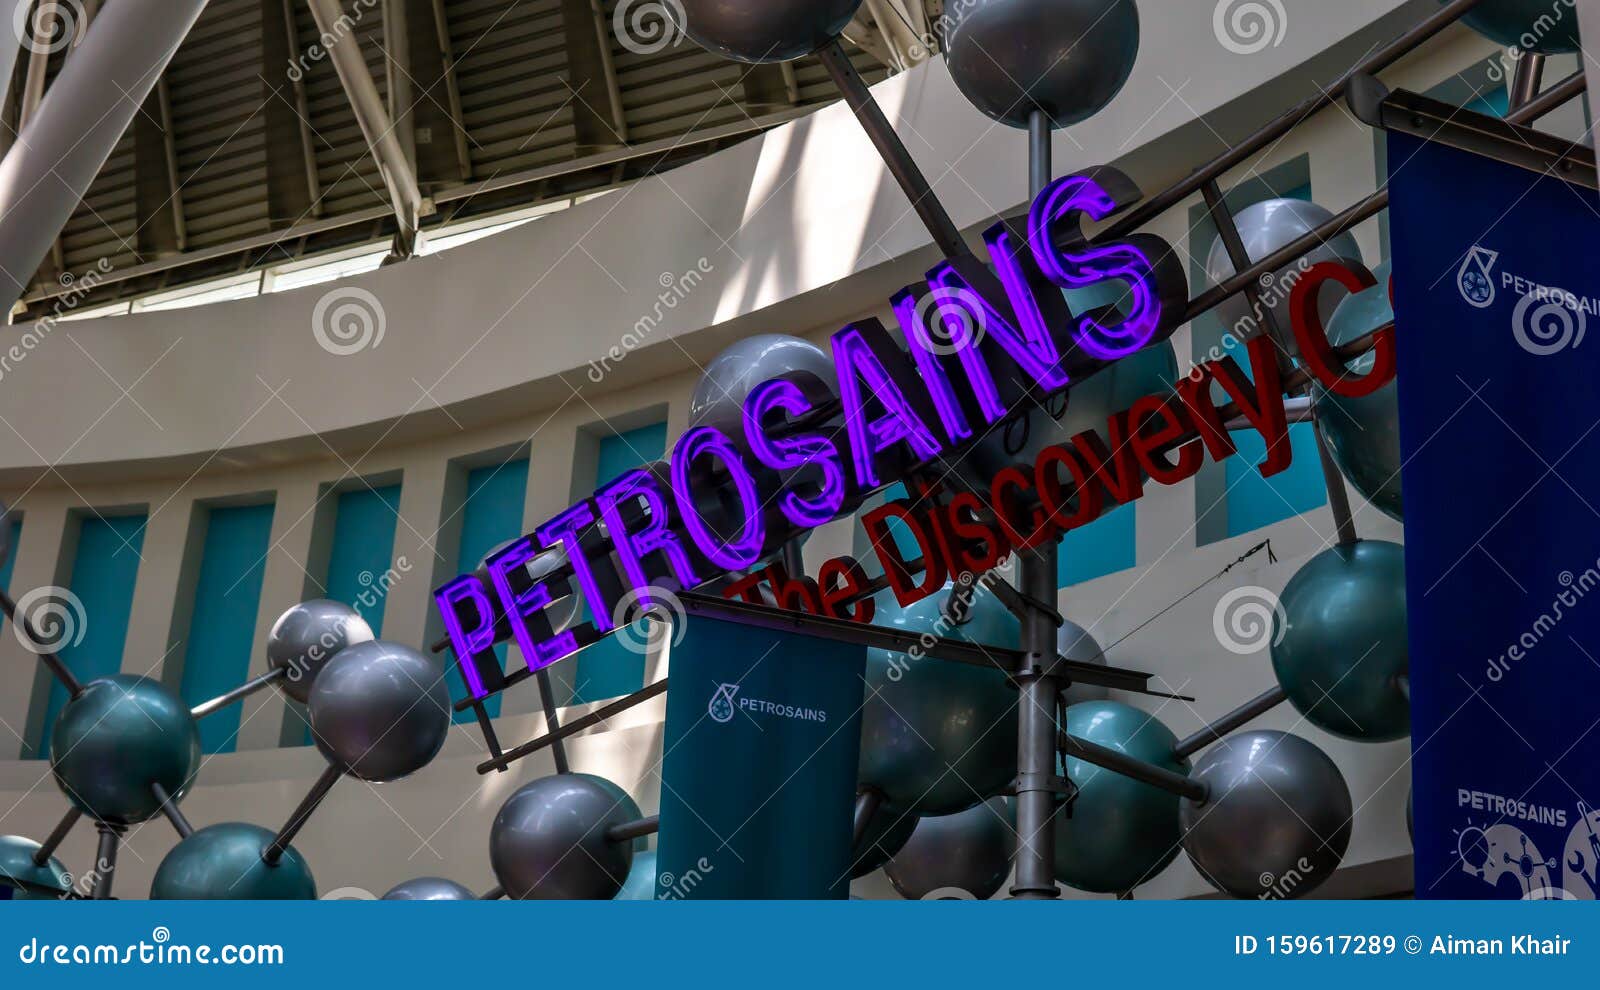 Petrosains The Discovery Centre Is A Malaysian Science And Technology Museum Located In The Heart Of Kuala Lumpur Within Suria Editorial Stock Image Image Of Kuala Kids 159617289